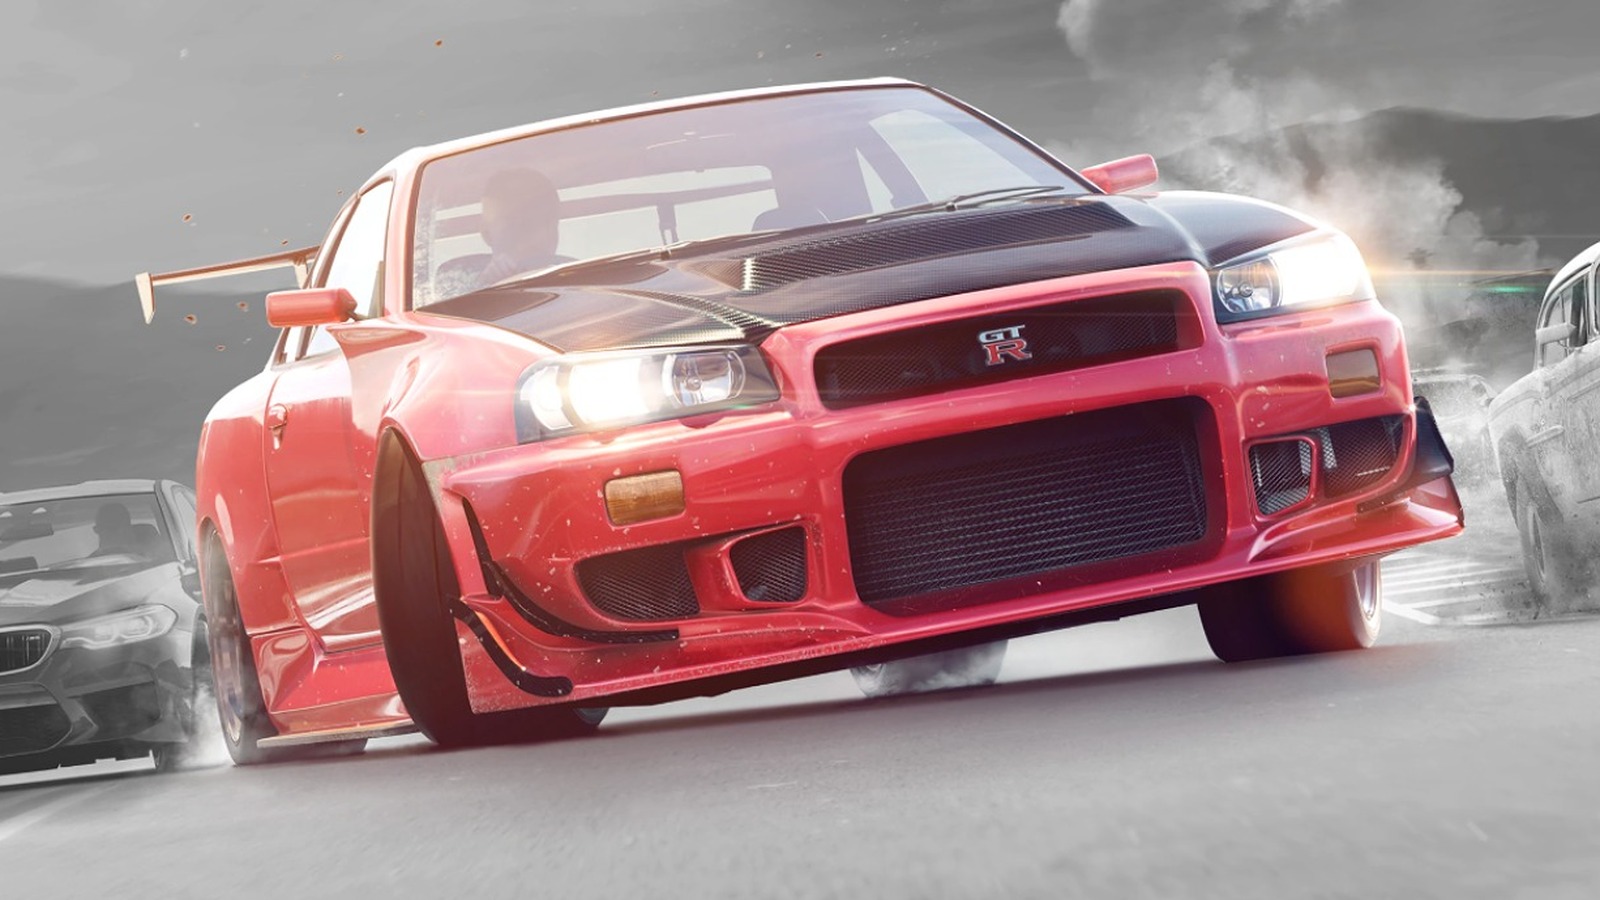 Review: Need for Speed Most Wanted (iOS/Android) – Destructoid